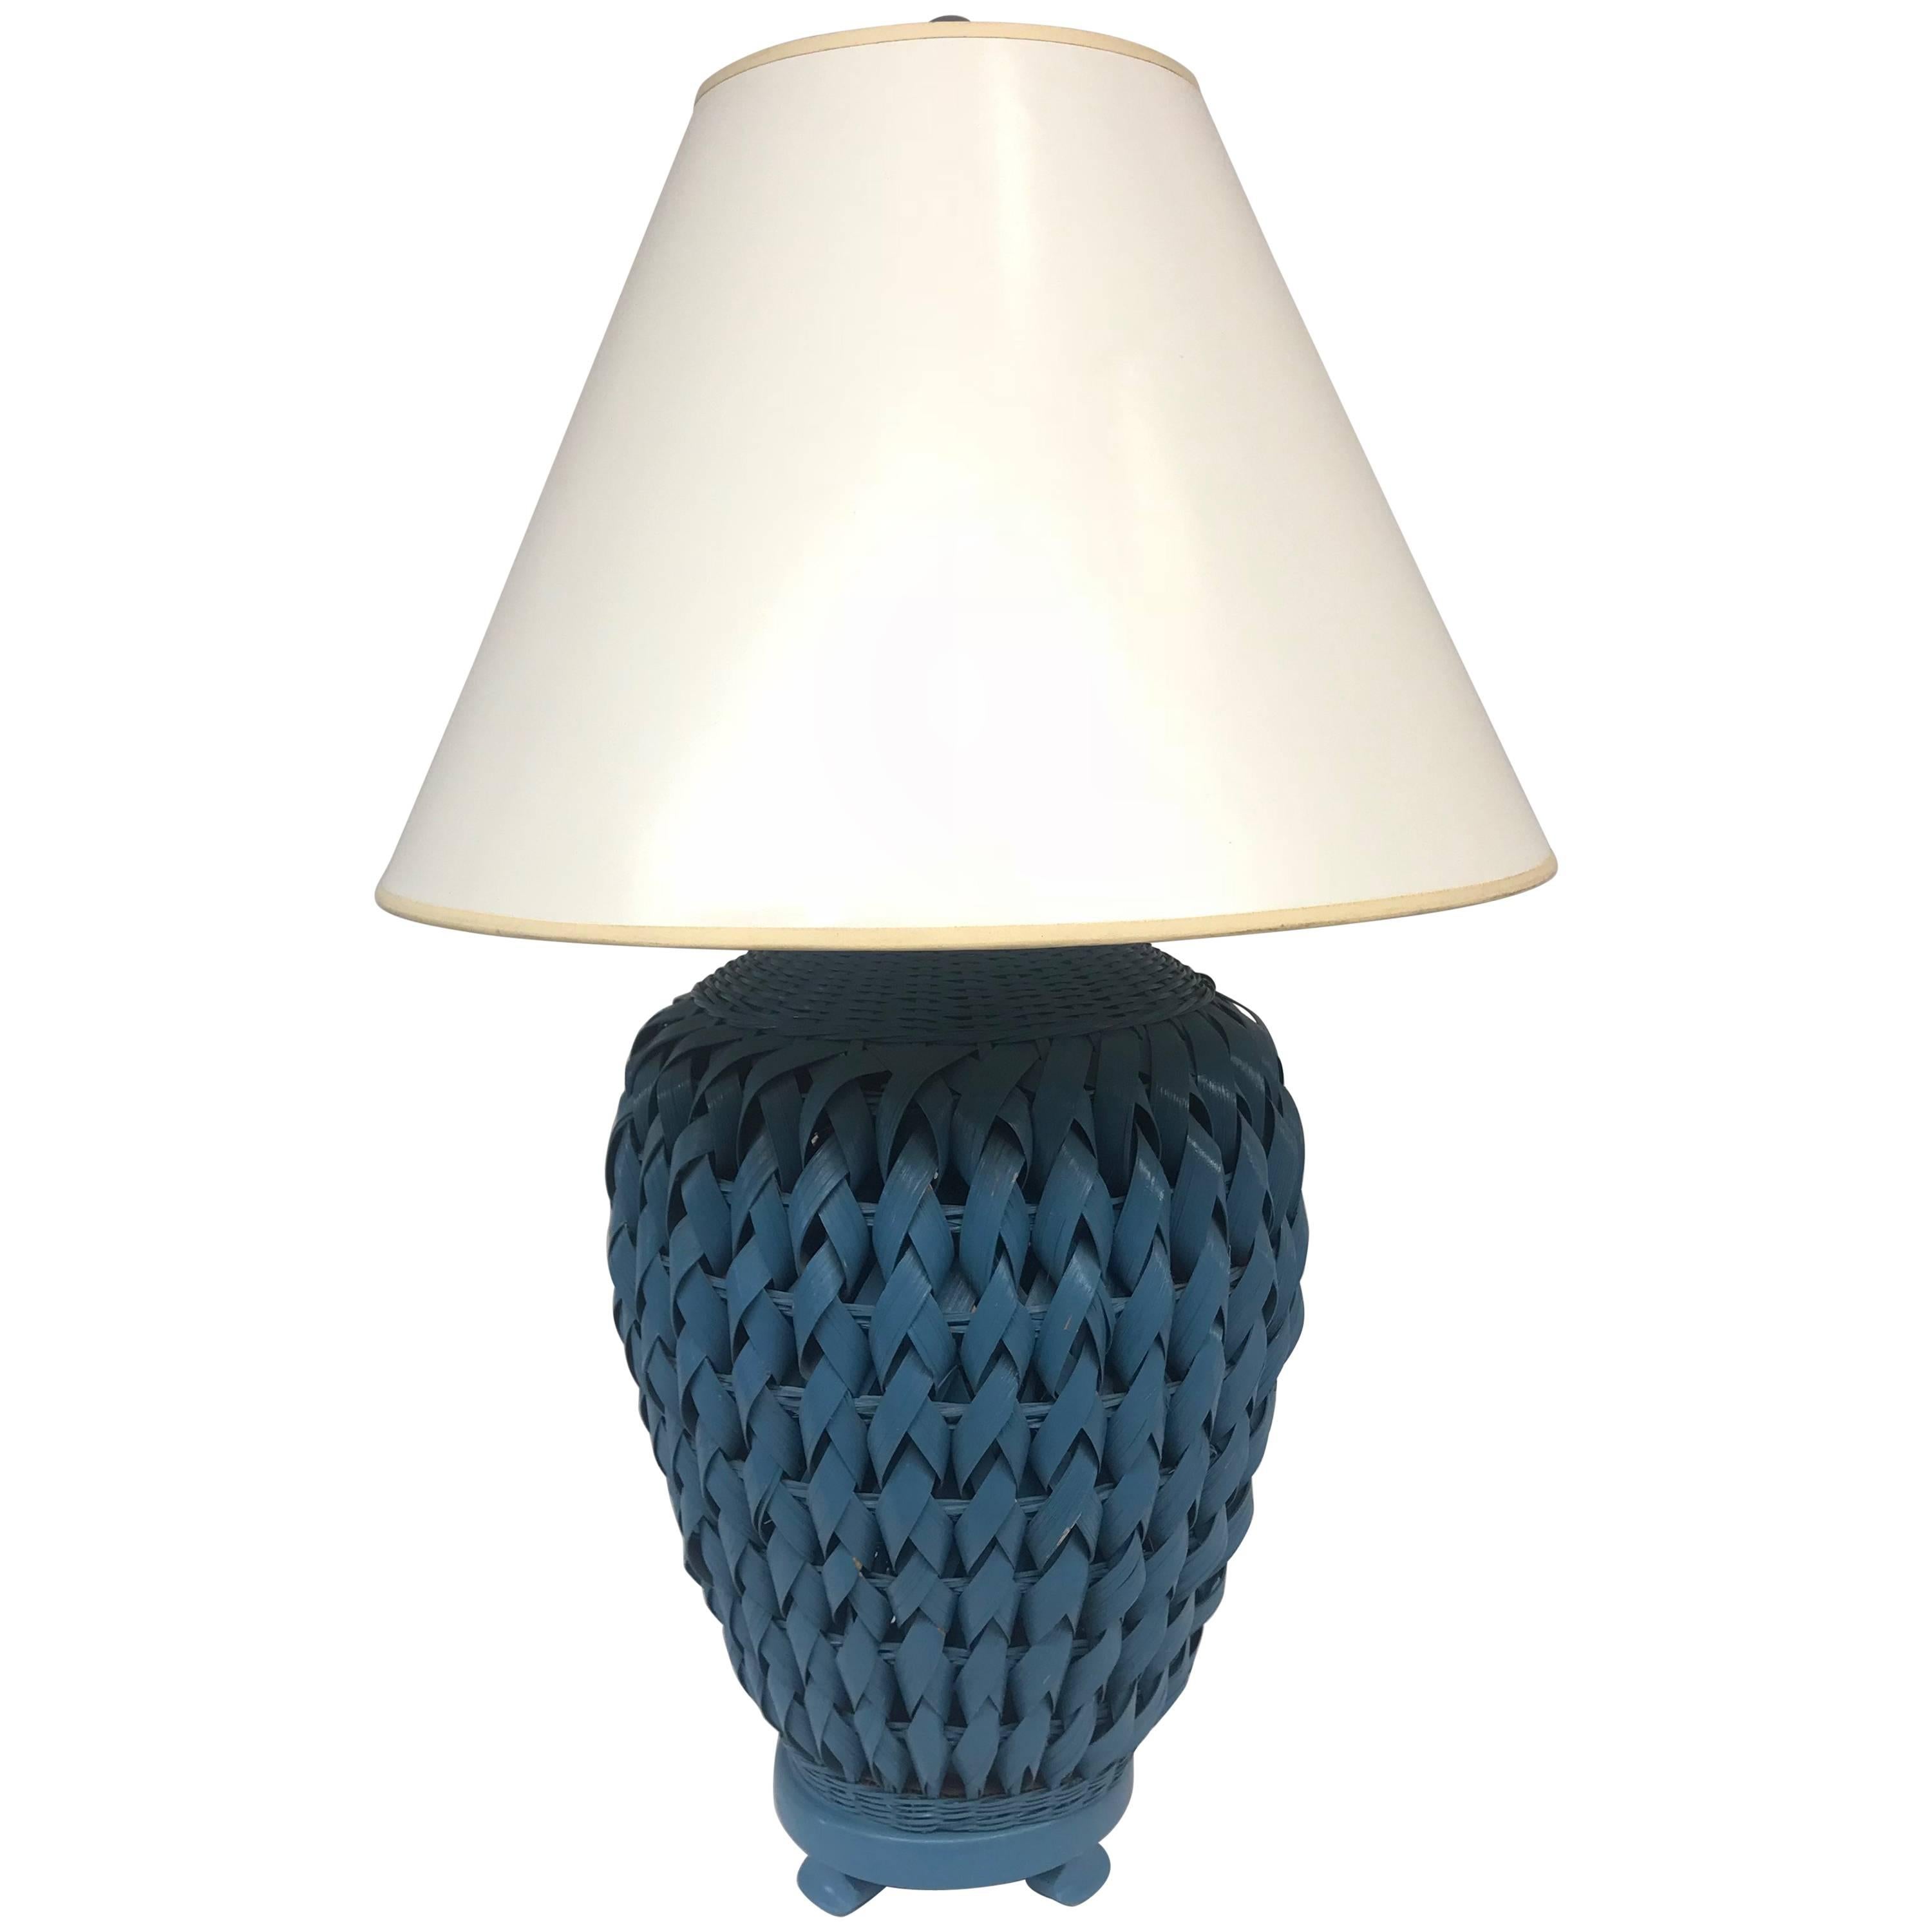 Blue Woven Wicker Table Lamp with Lacquered Shade For Sale